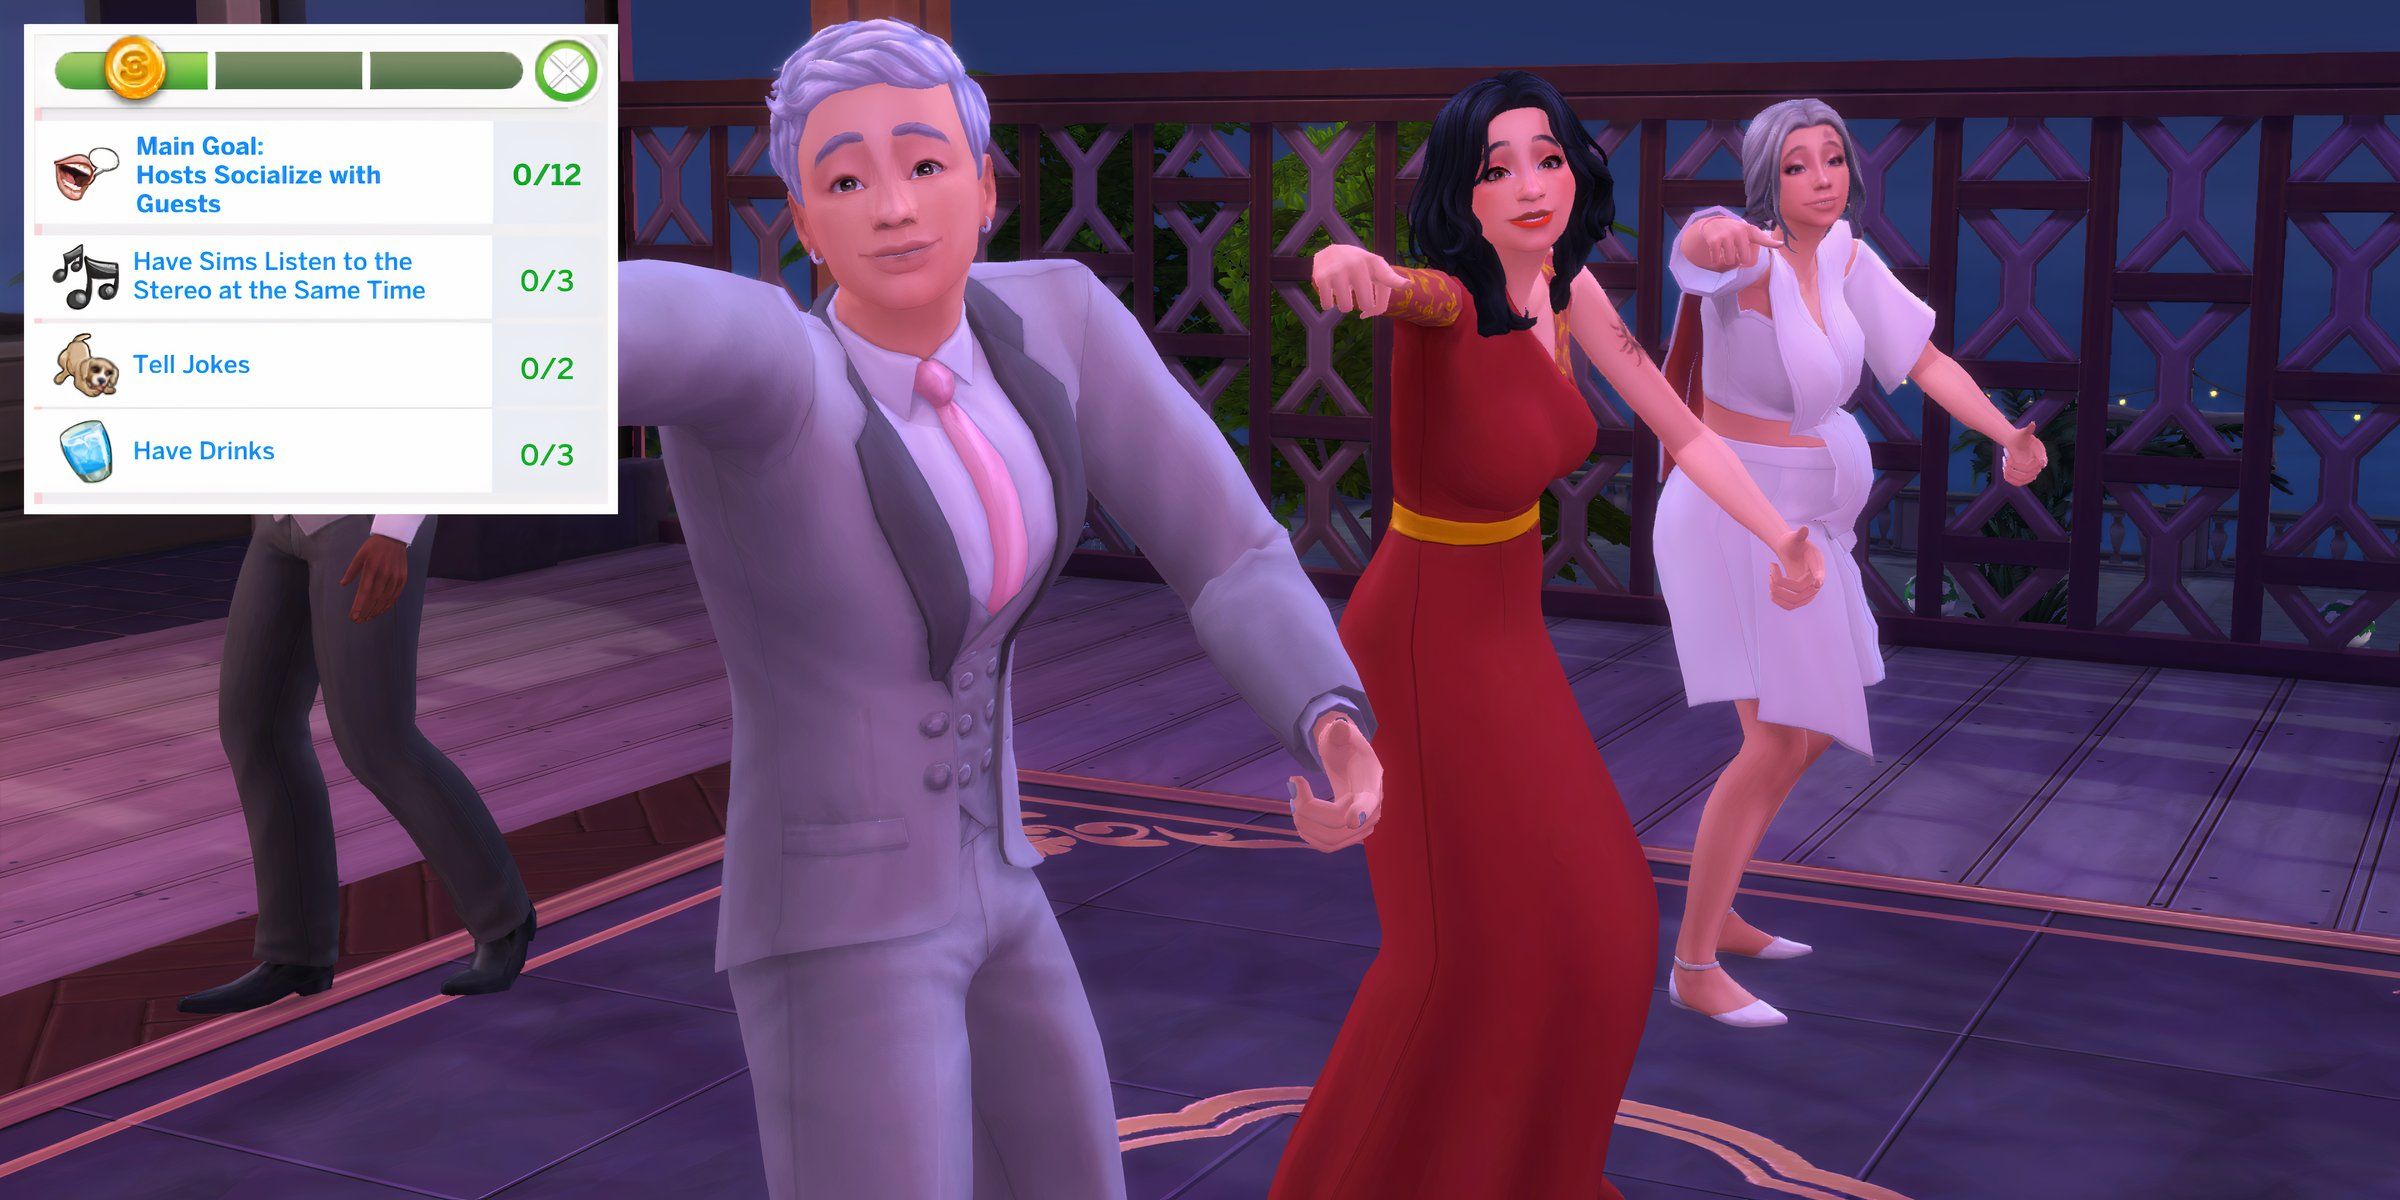 Sims partying and enjoying a neverending party thanks to the Social Events Unlimited Time mod